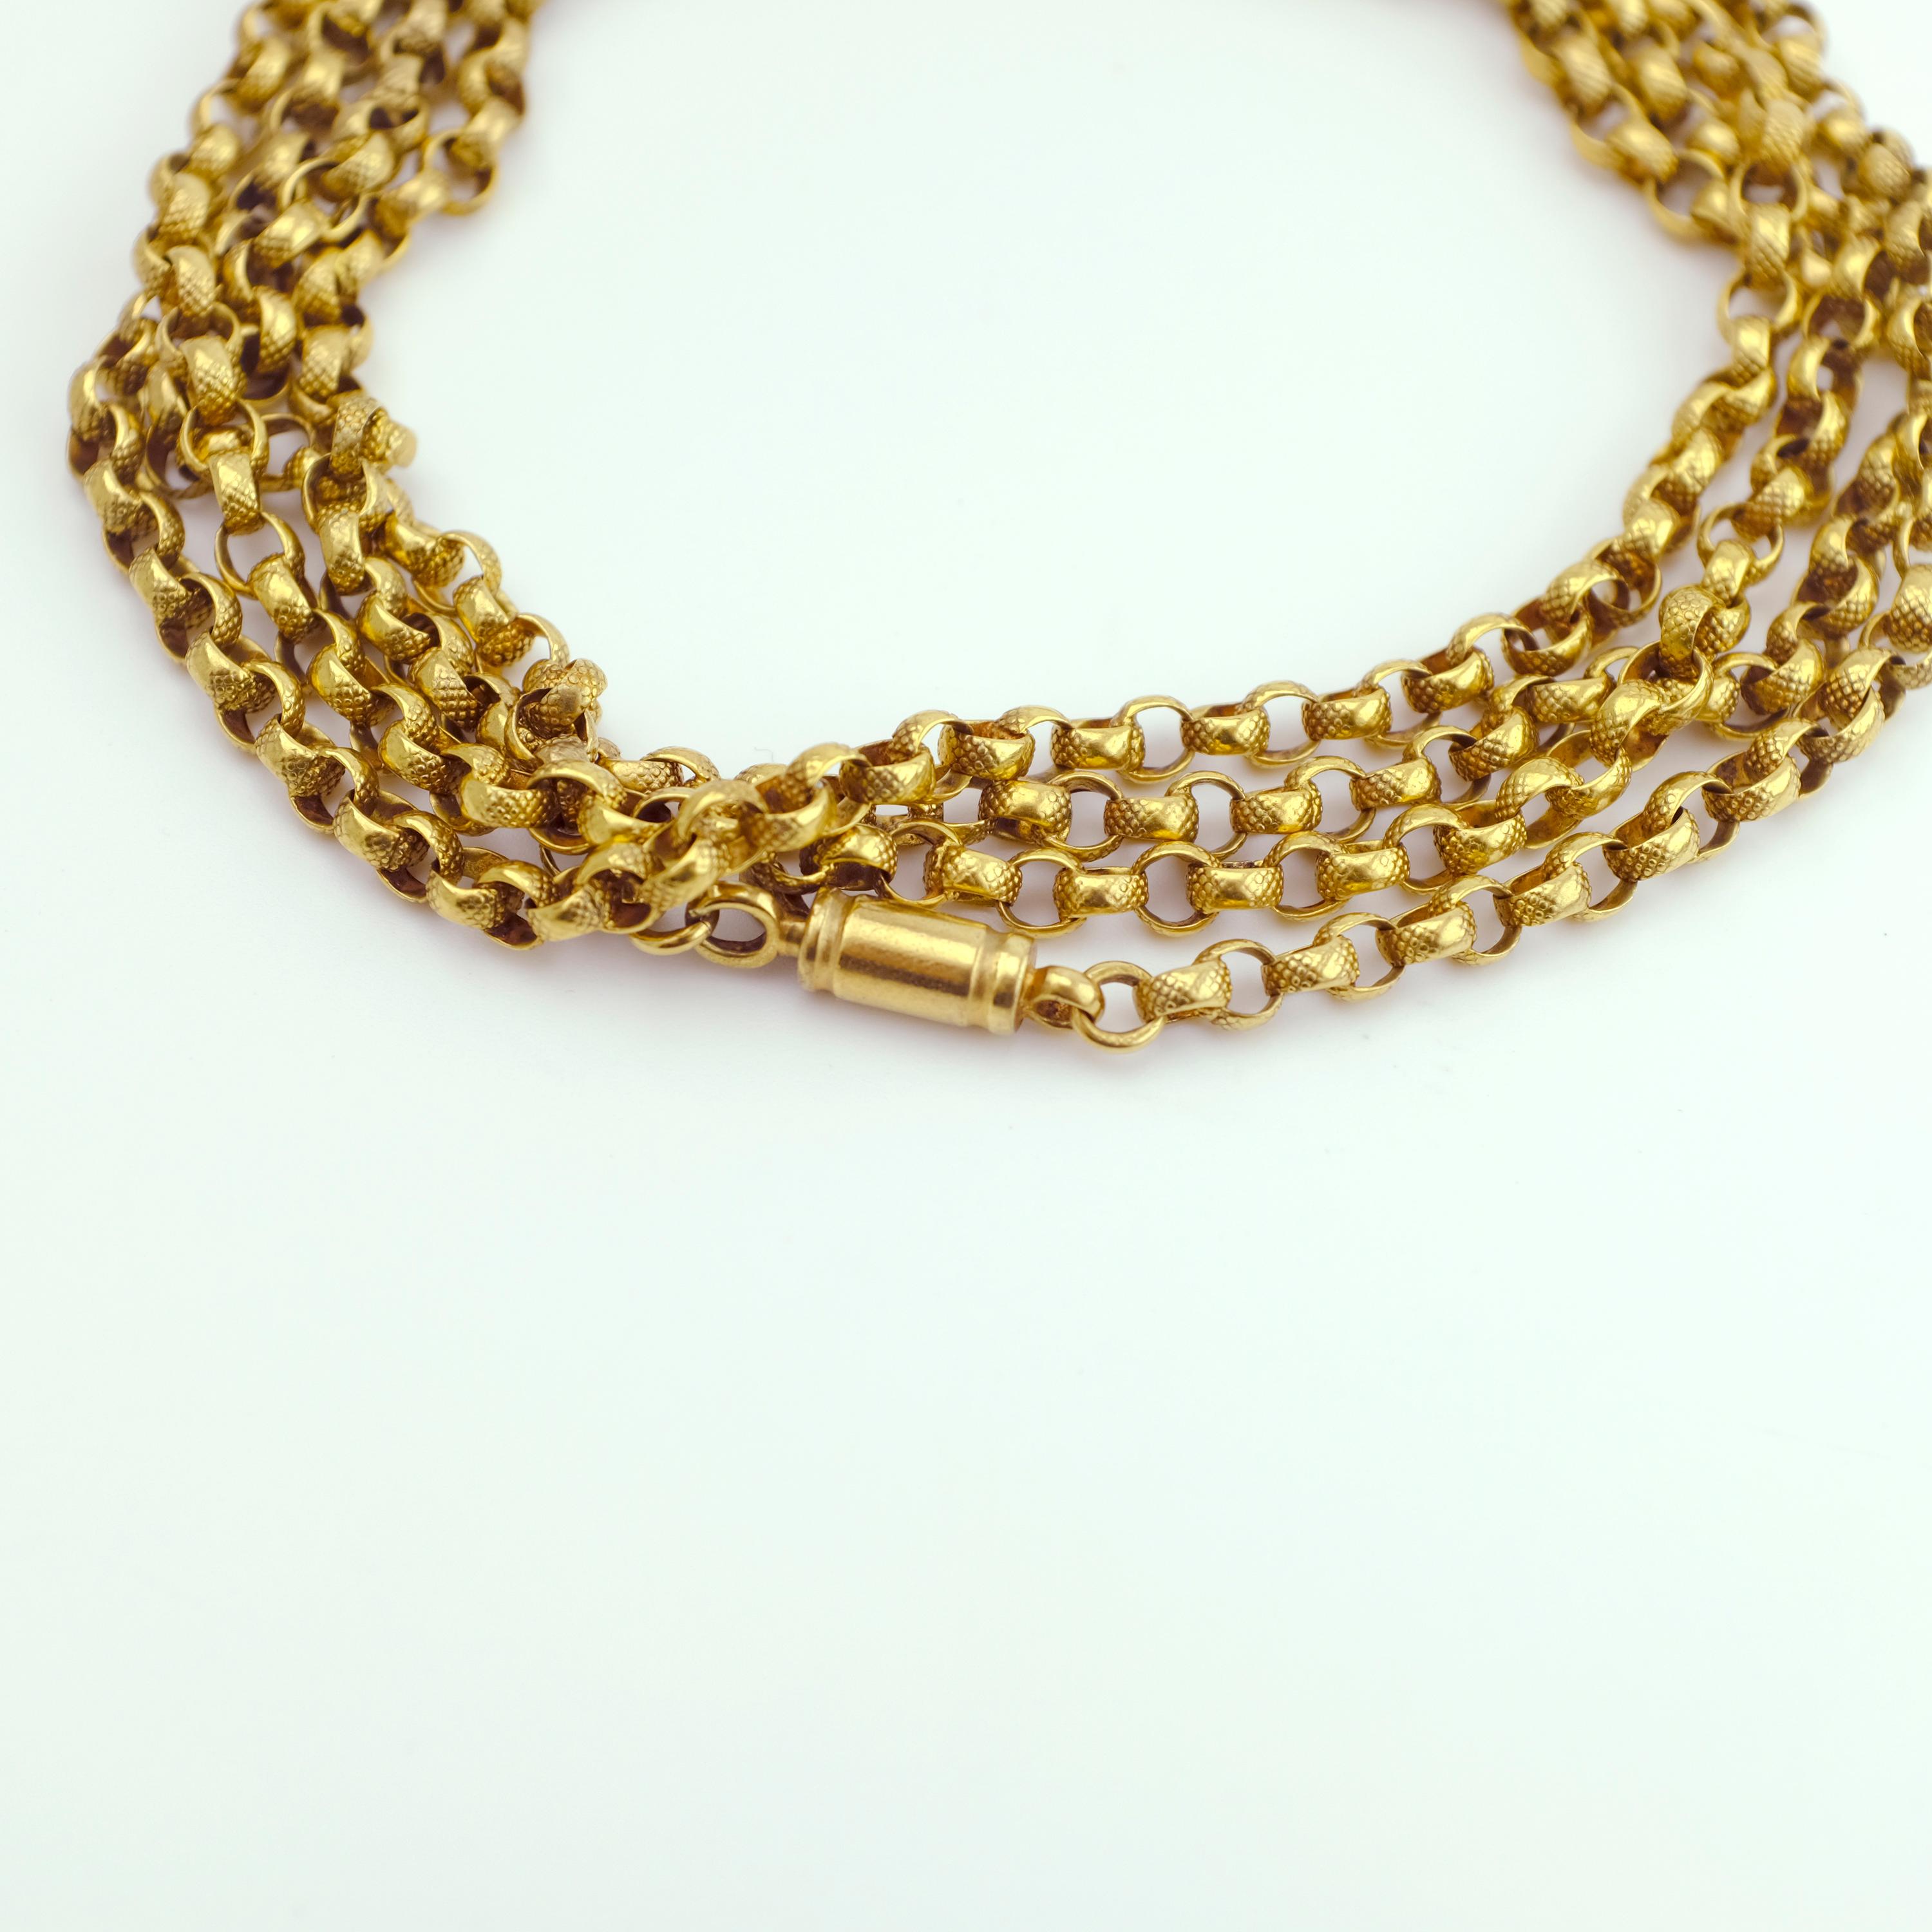 Women's Pinchbeck Gold Chain from Victorian England